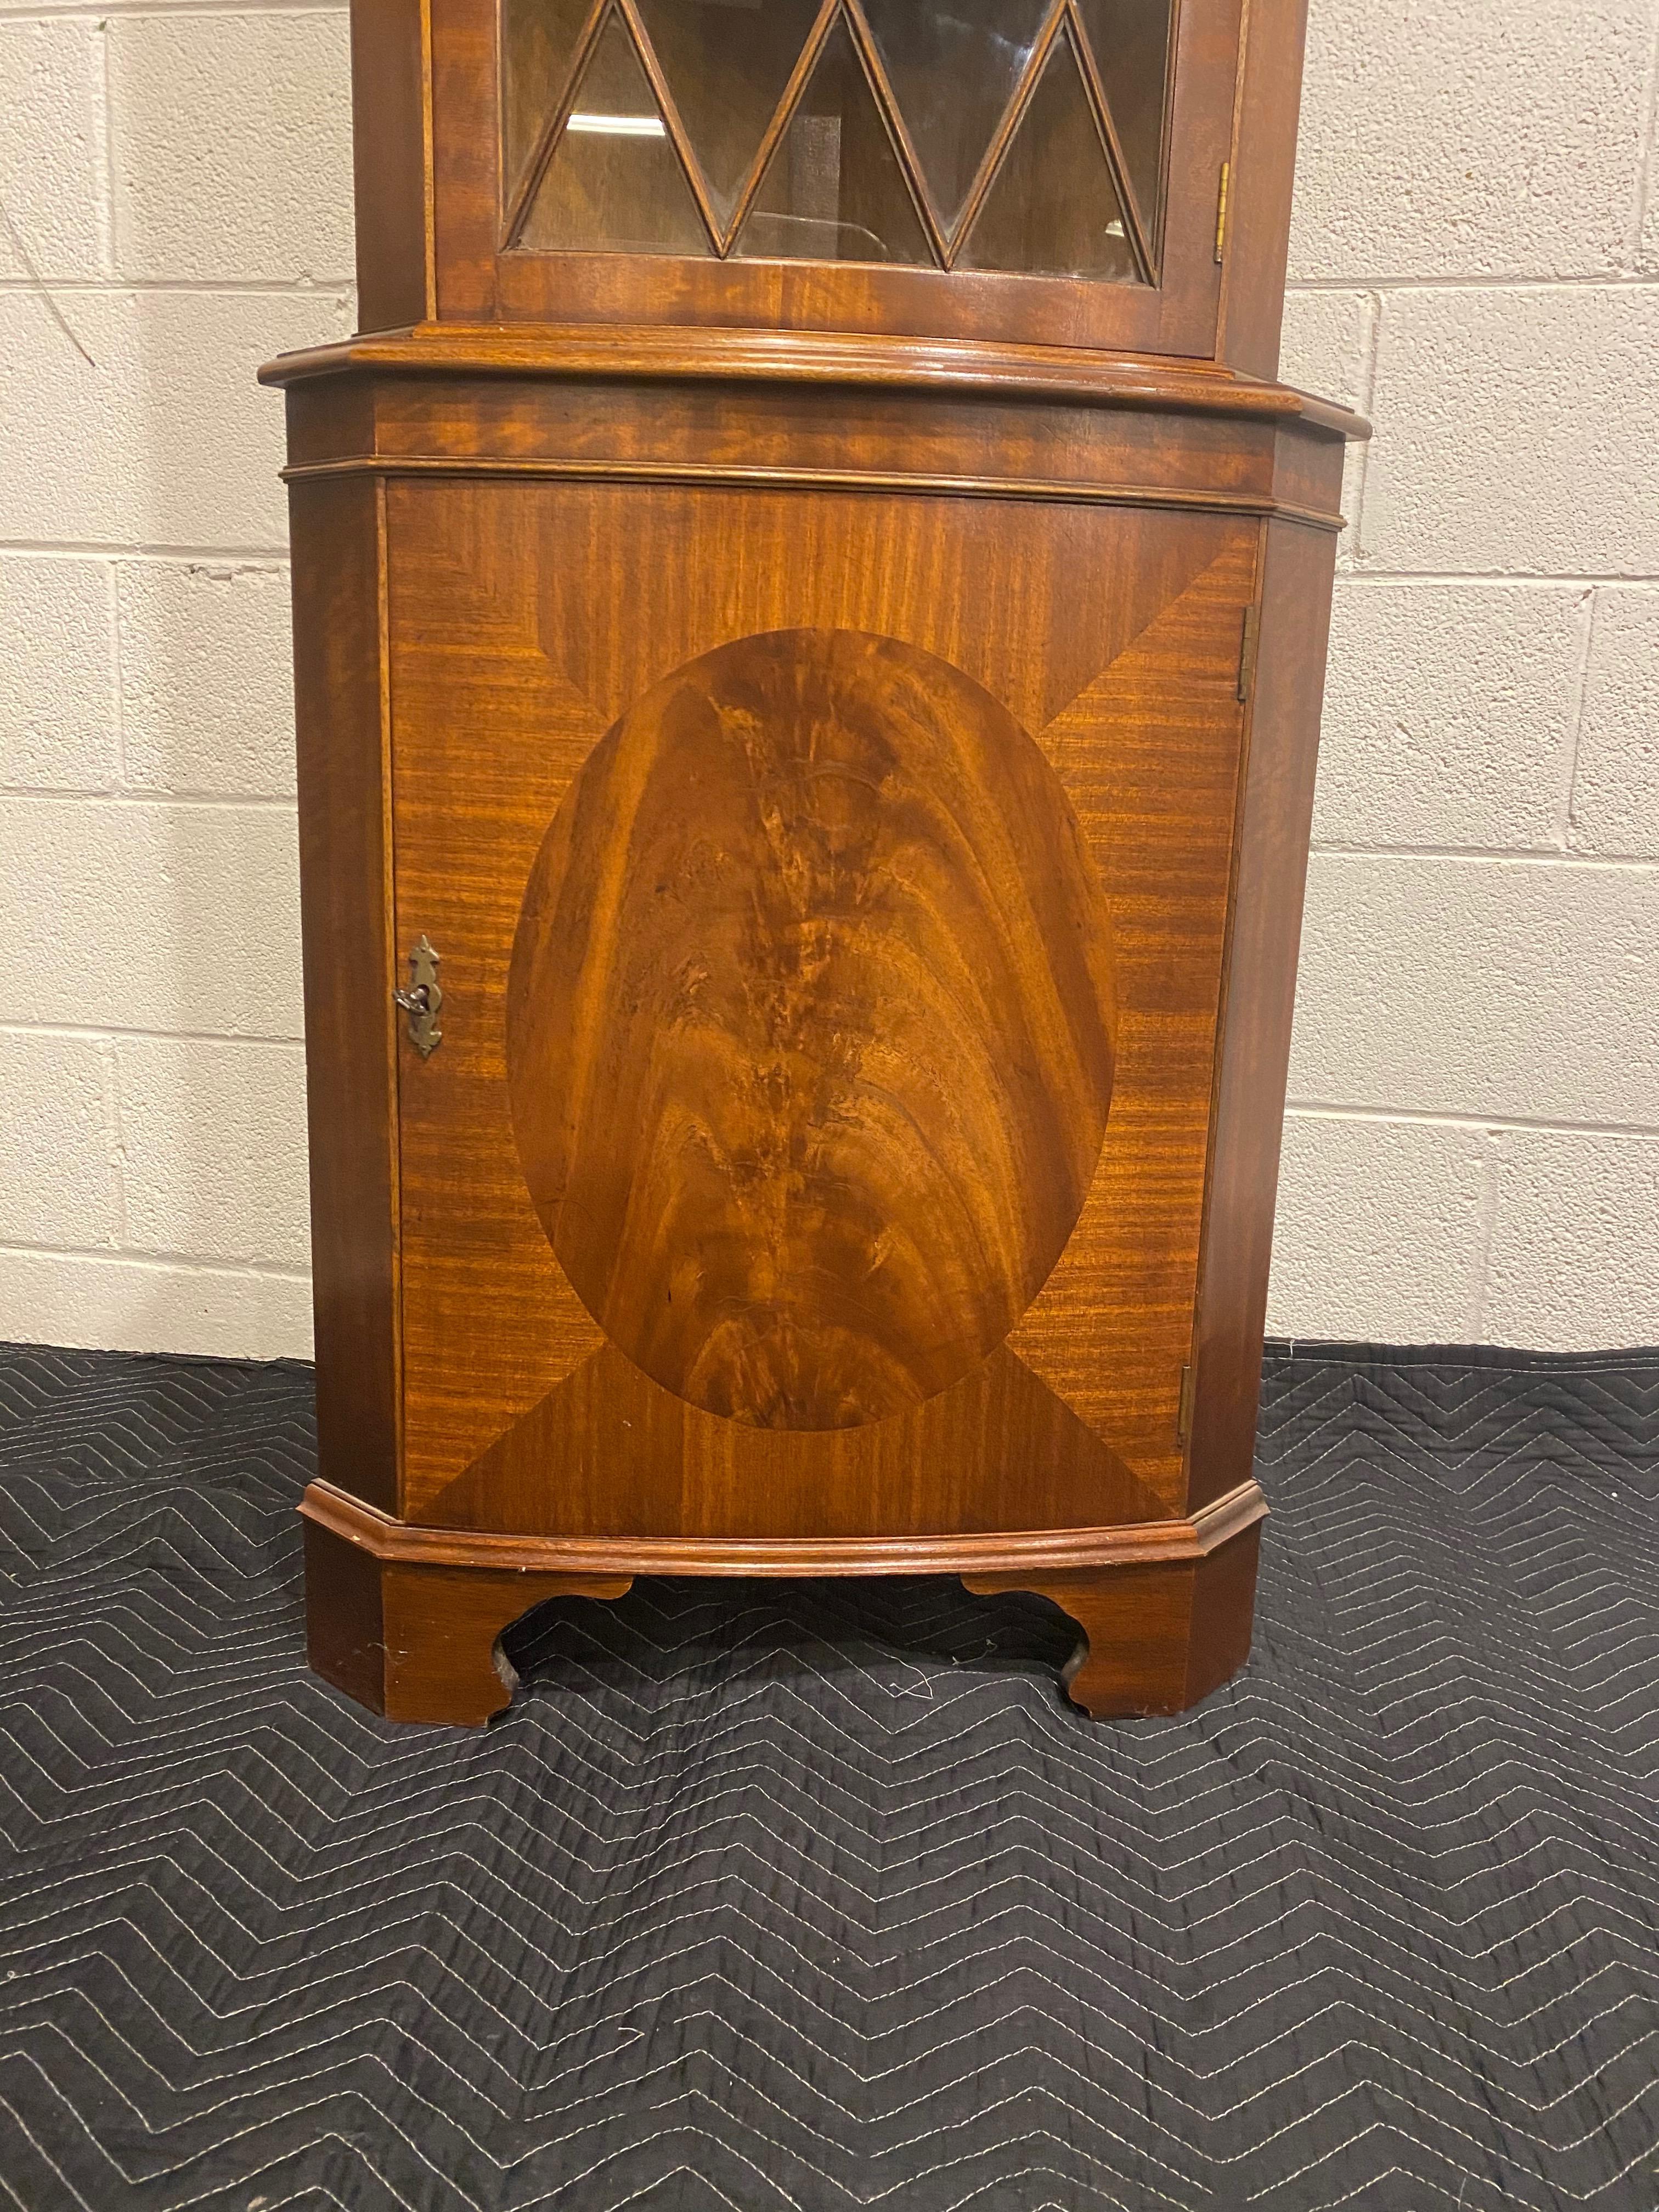 A lovely mahogany corner cabinet with a bowed shape curved front face, glass door with individual hand glazed panes. Single door top and bottom, bottom door is a figured mahogany centre panel with a mahogany cross band detail. Dentil moulding on the